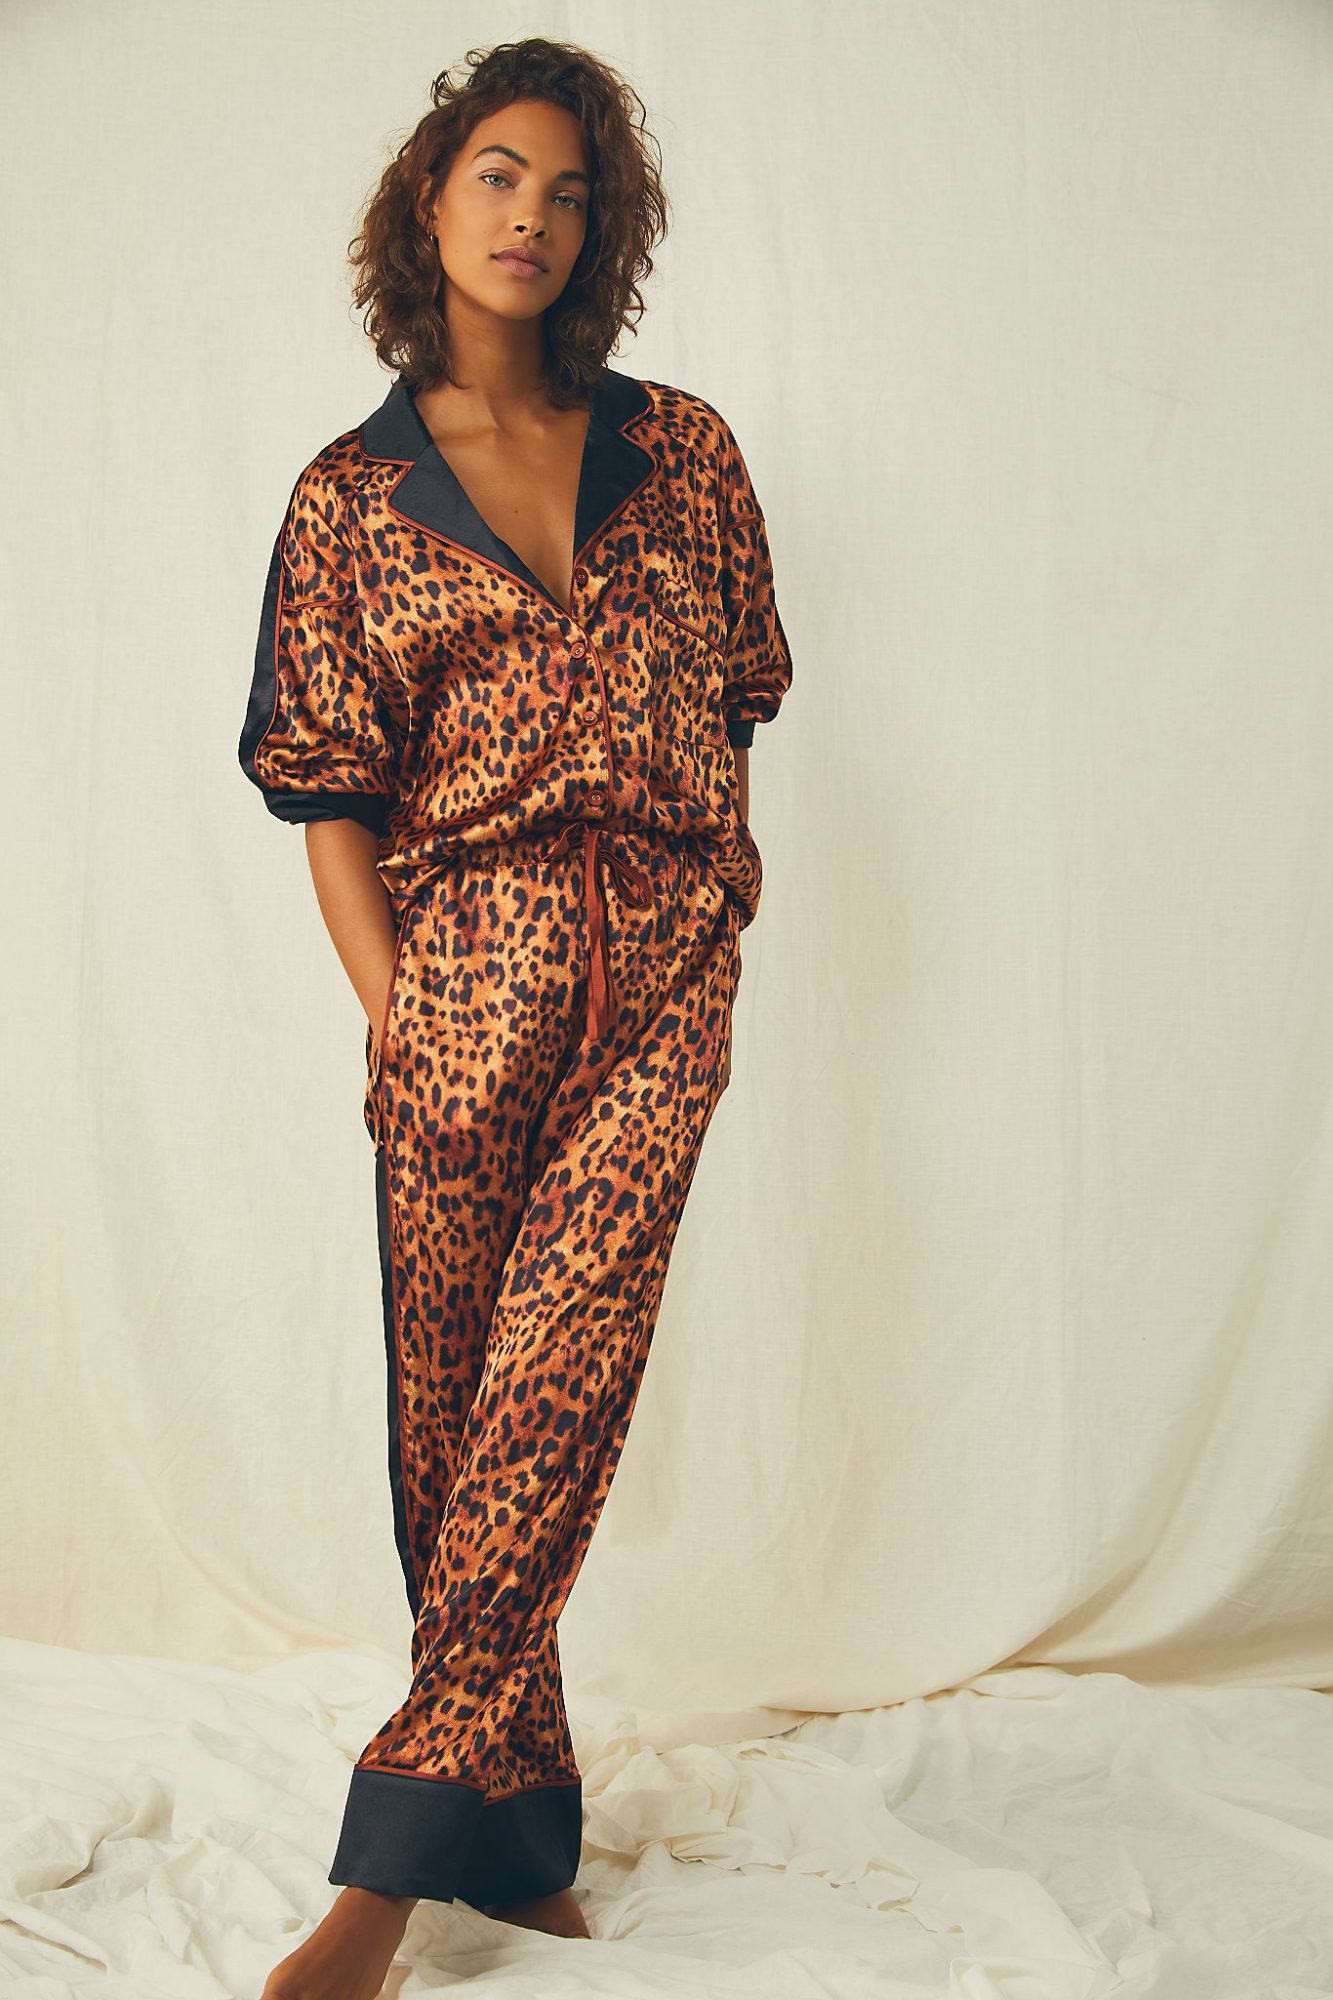 Anthropologie silk pajamas New Year's Eve outfit